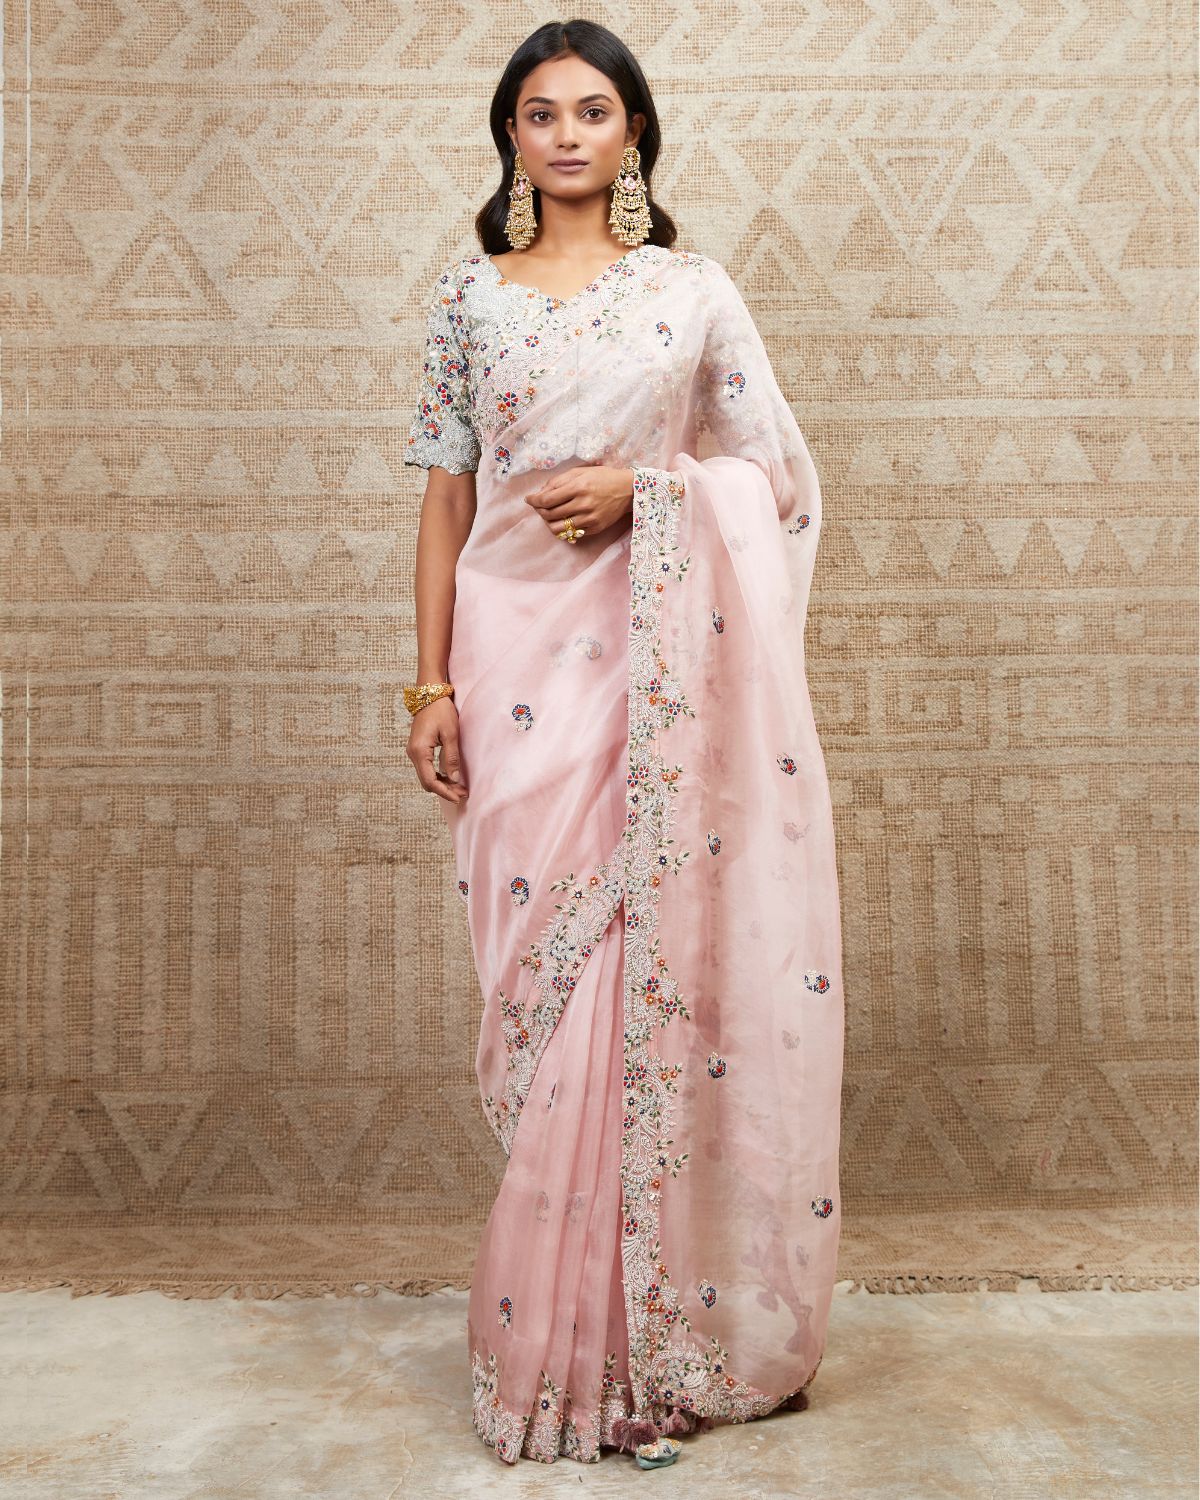 Flamingo Pink Floral Embroidered Sari With Blouse by Prisho at KYNAH.